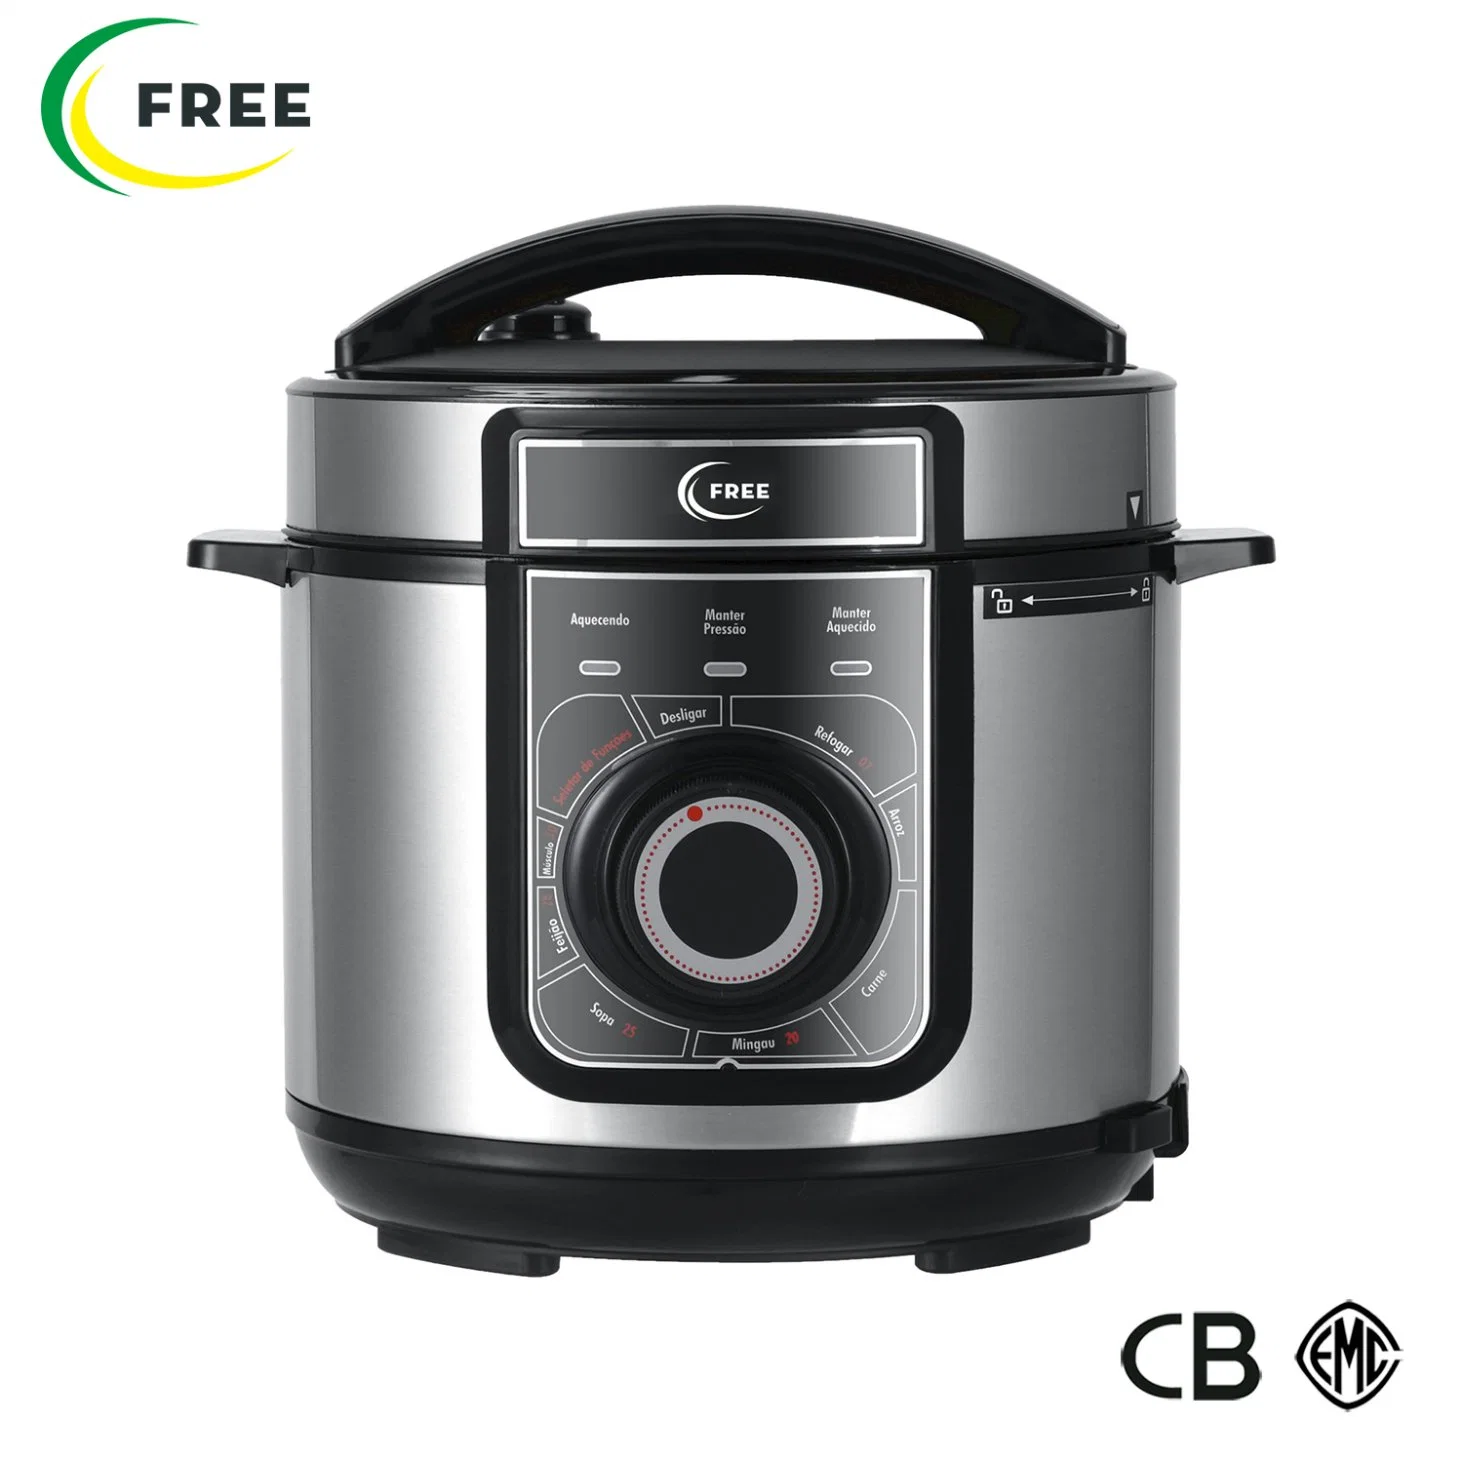 New Model 6L Smart Electric Pressure Cooker Rice Cooker with Knob Control